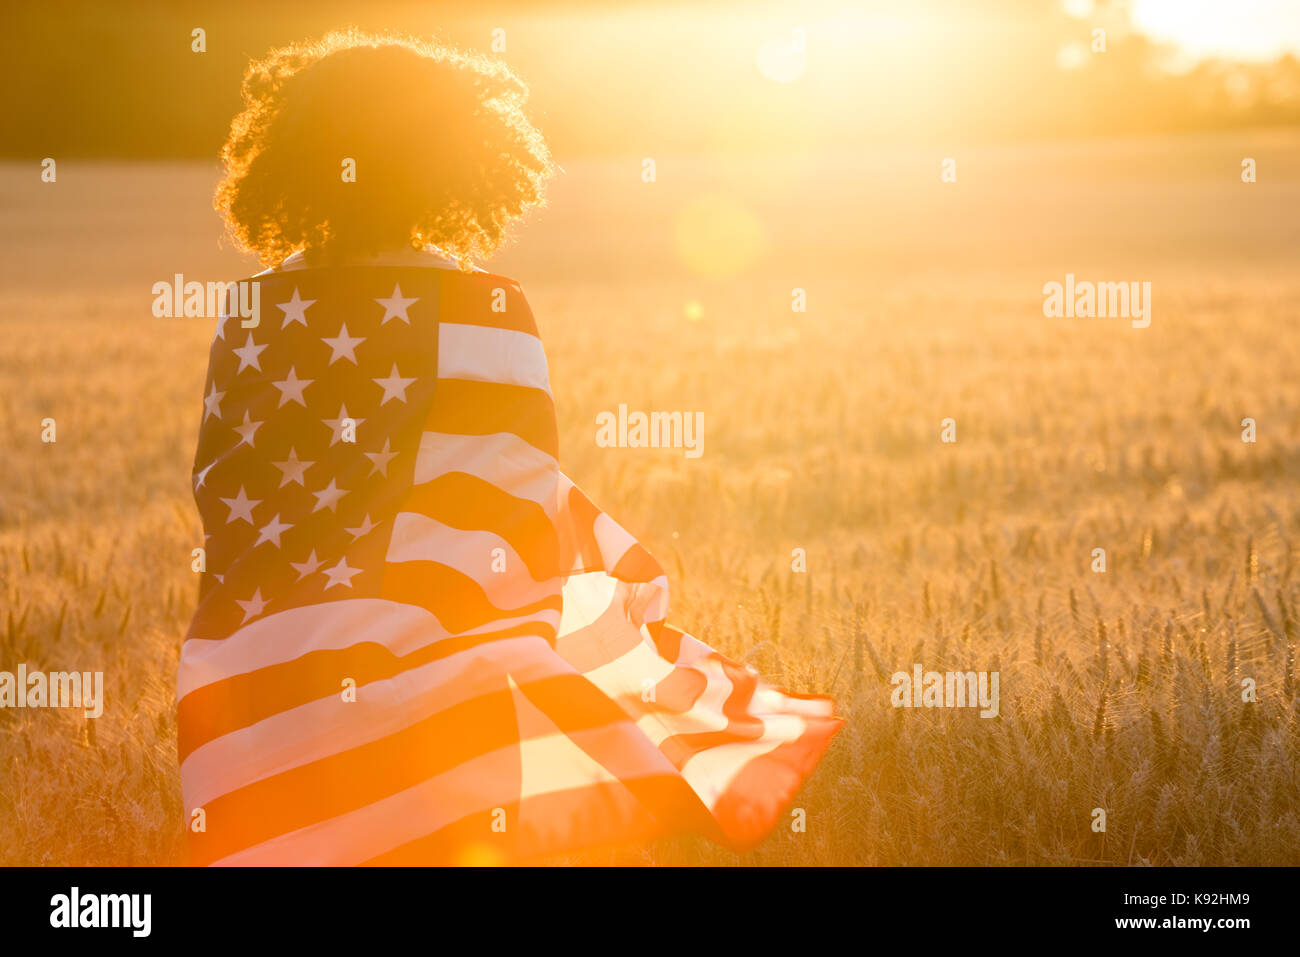 Mixed race African American girl teenager female young woman in a field of wheat or barley crops wrapped in USA stars and stripes flag in golden sunse Stock Photo